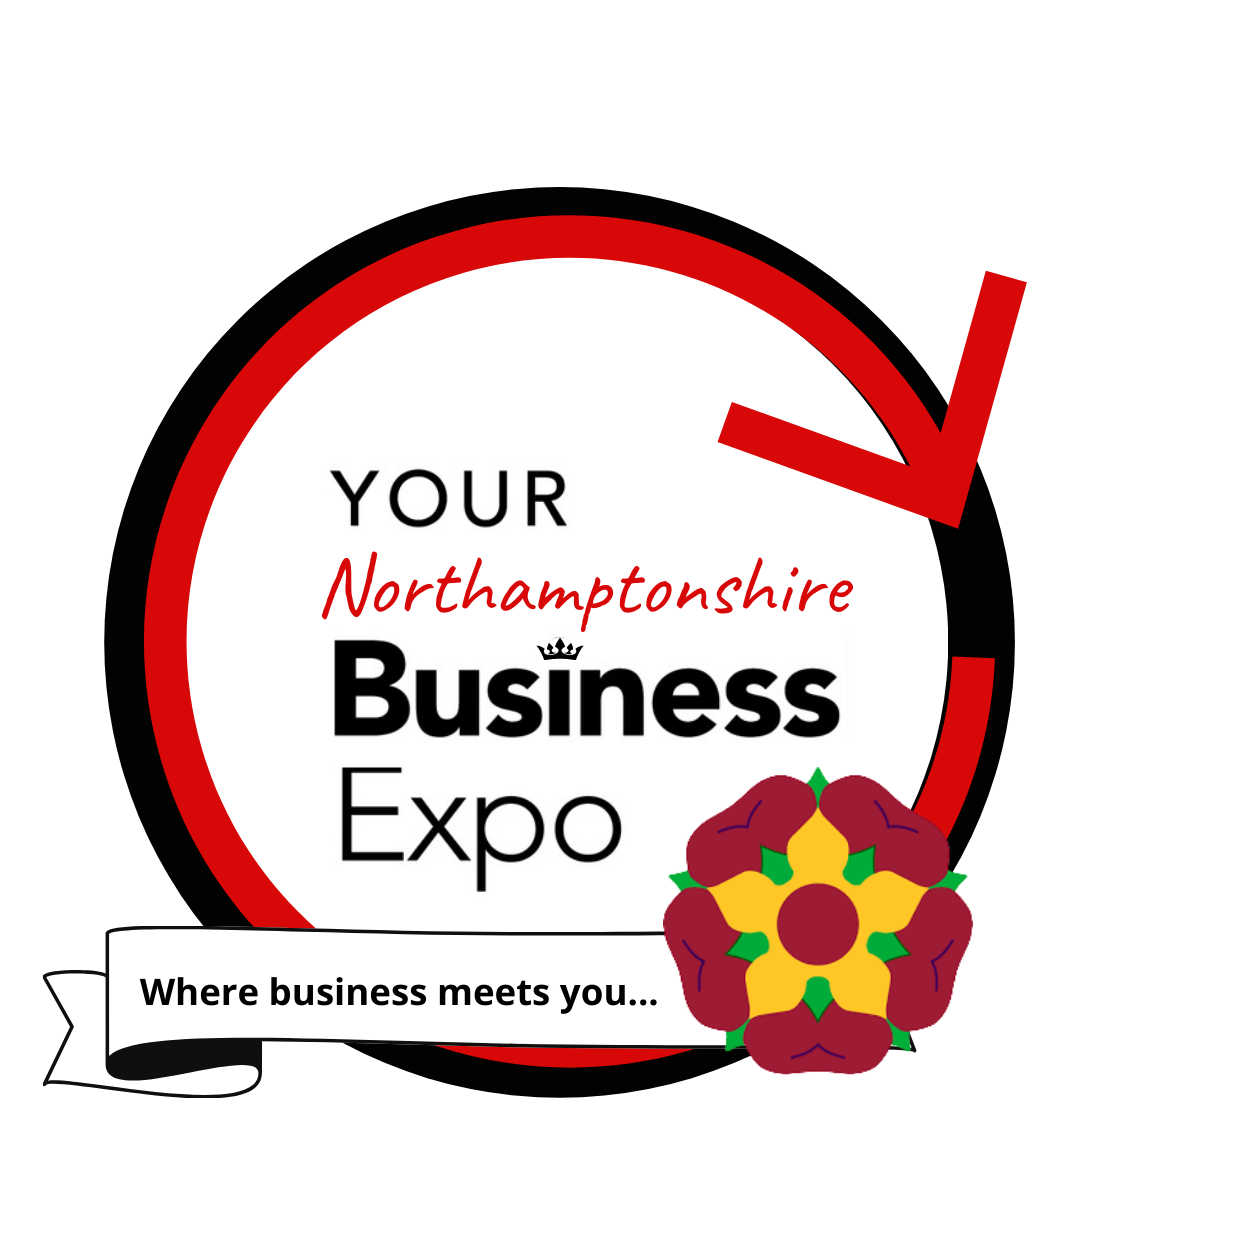 Northamptonshire Business Expo - 25th November - Holiday Inn, Corby. 